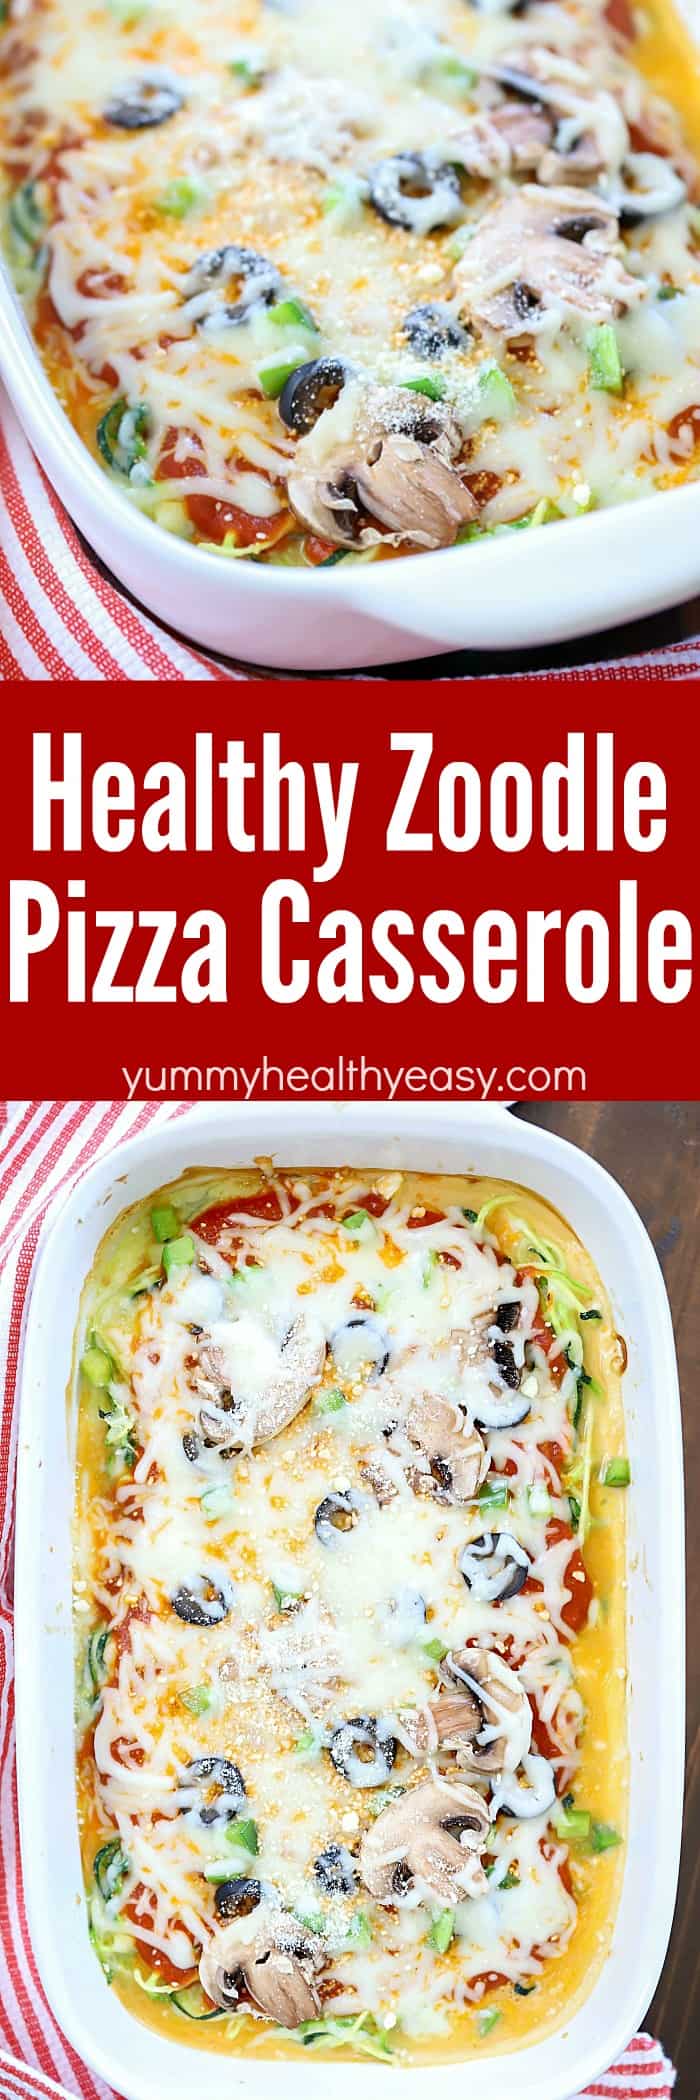 When you're craving pizza but want to steer clear of the carbs, make this Zoodle Pizza Casserole! It's quick and easy to make and is a whole lot healthier than actual pizza! PLUS there's a cookbook giveaway too!